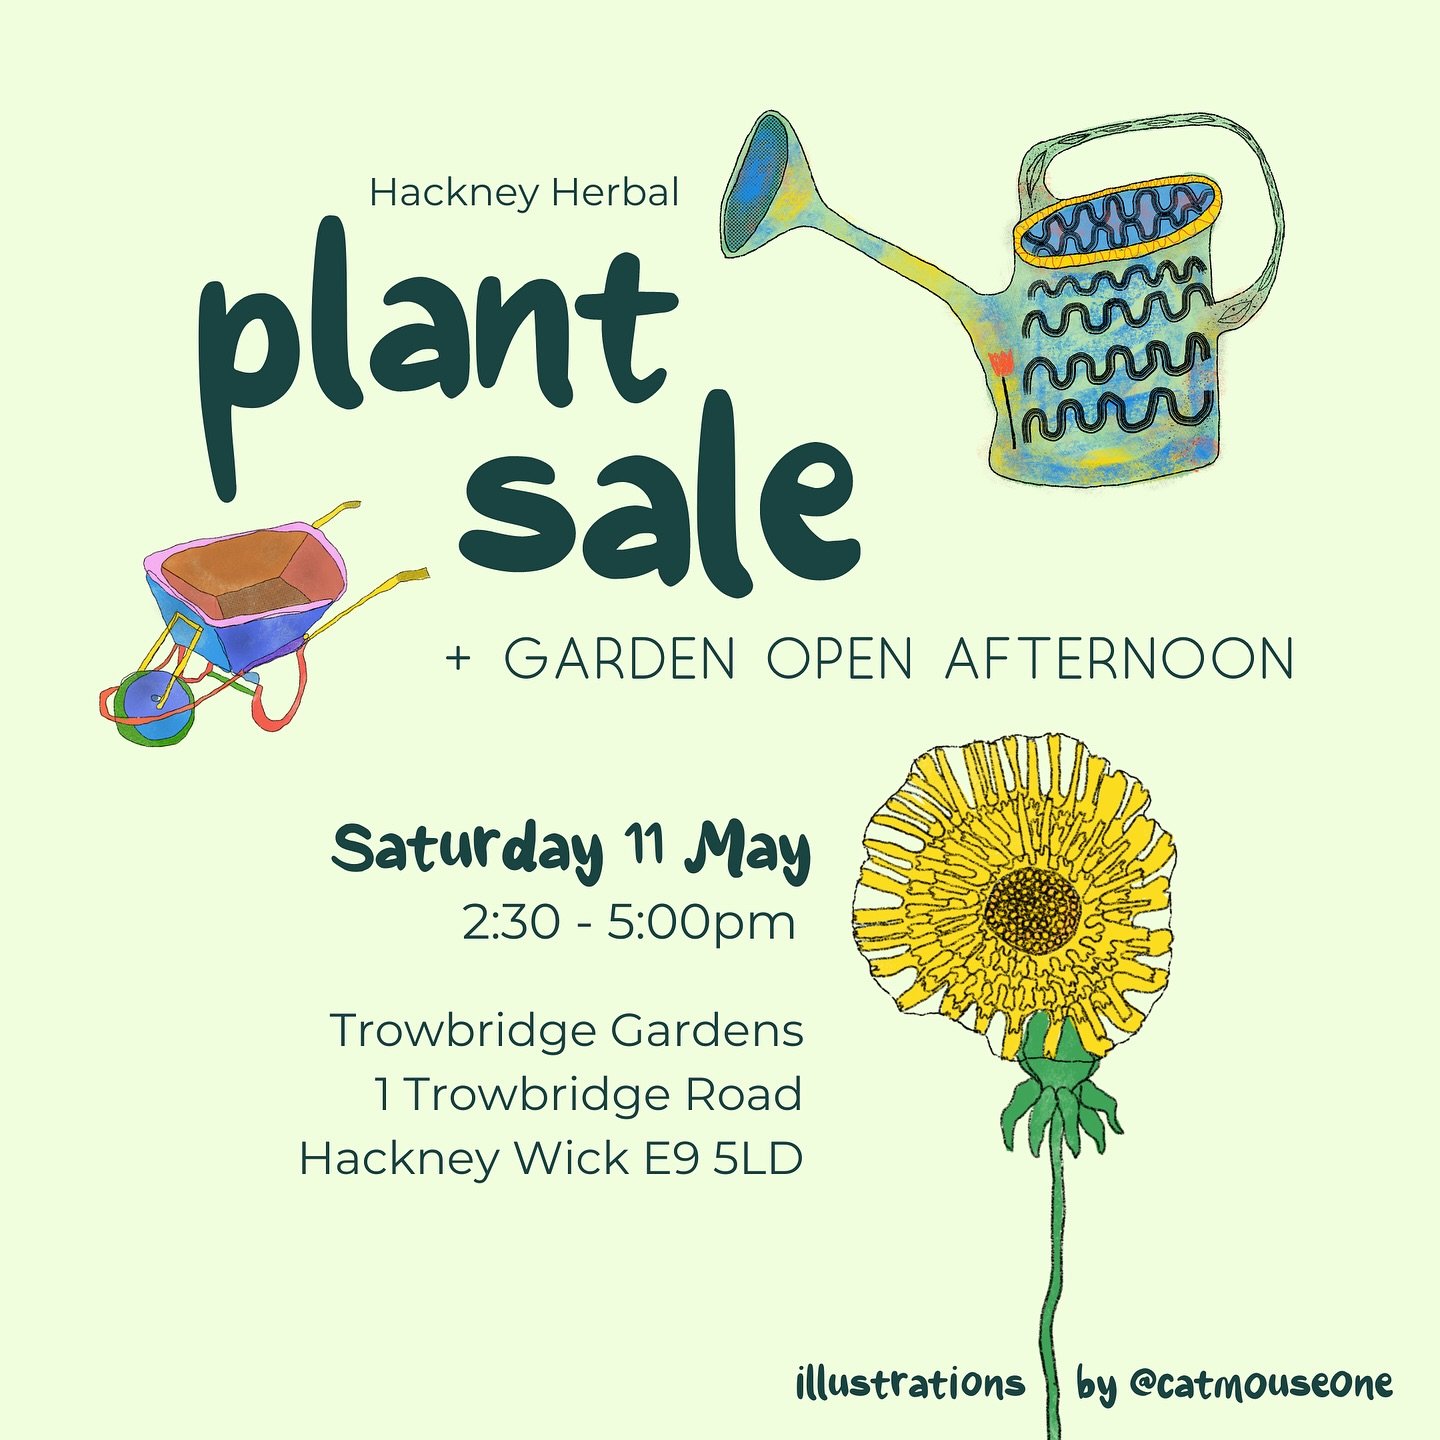 Join us at our garden in Hackney Wick next weekend for a Plant Sale + Garden Open Afternoon. Enjoy the herb garden in its late spring glory and pick up some plants for your own garden. We&rsquo;ll have a range of herbs, flowers and edible plants as w